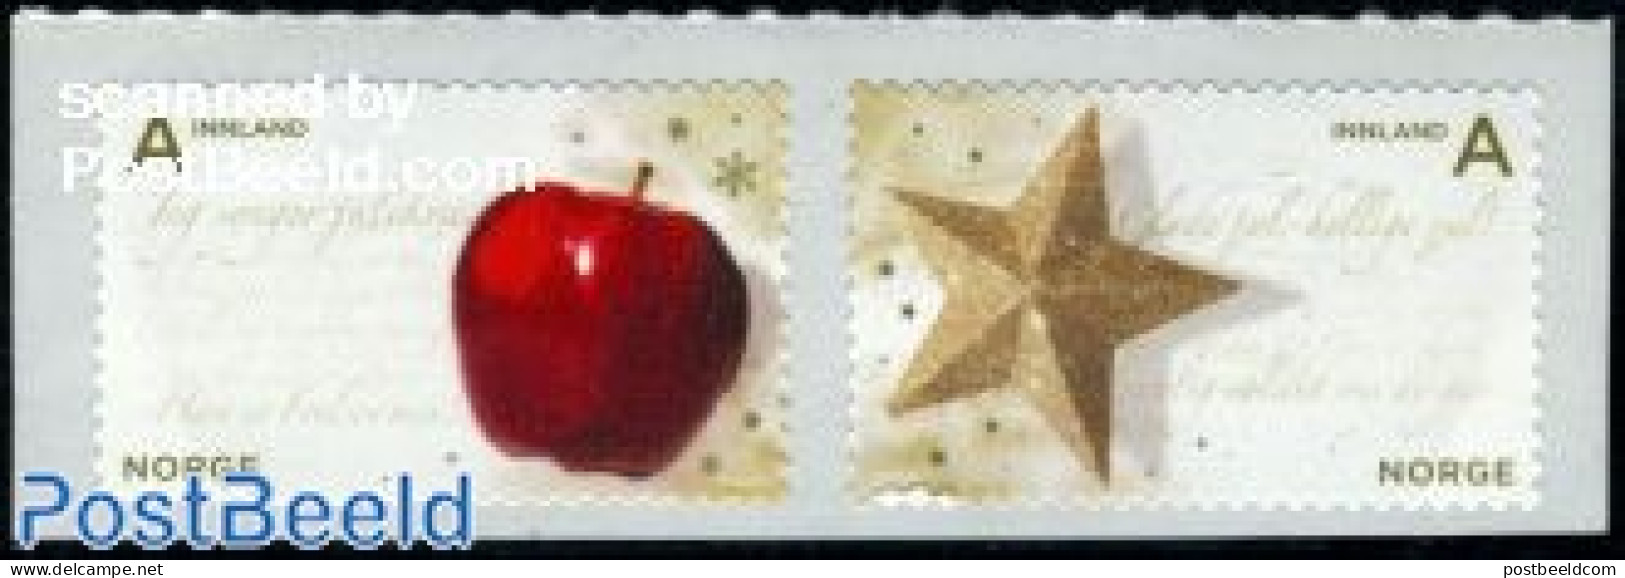 Norway 2009 Christmas 2v S-a, Mint NH, Nature - Religion - Fruit - Christmas - Neufs